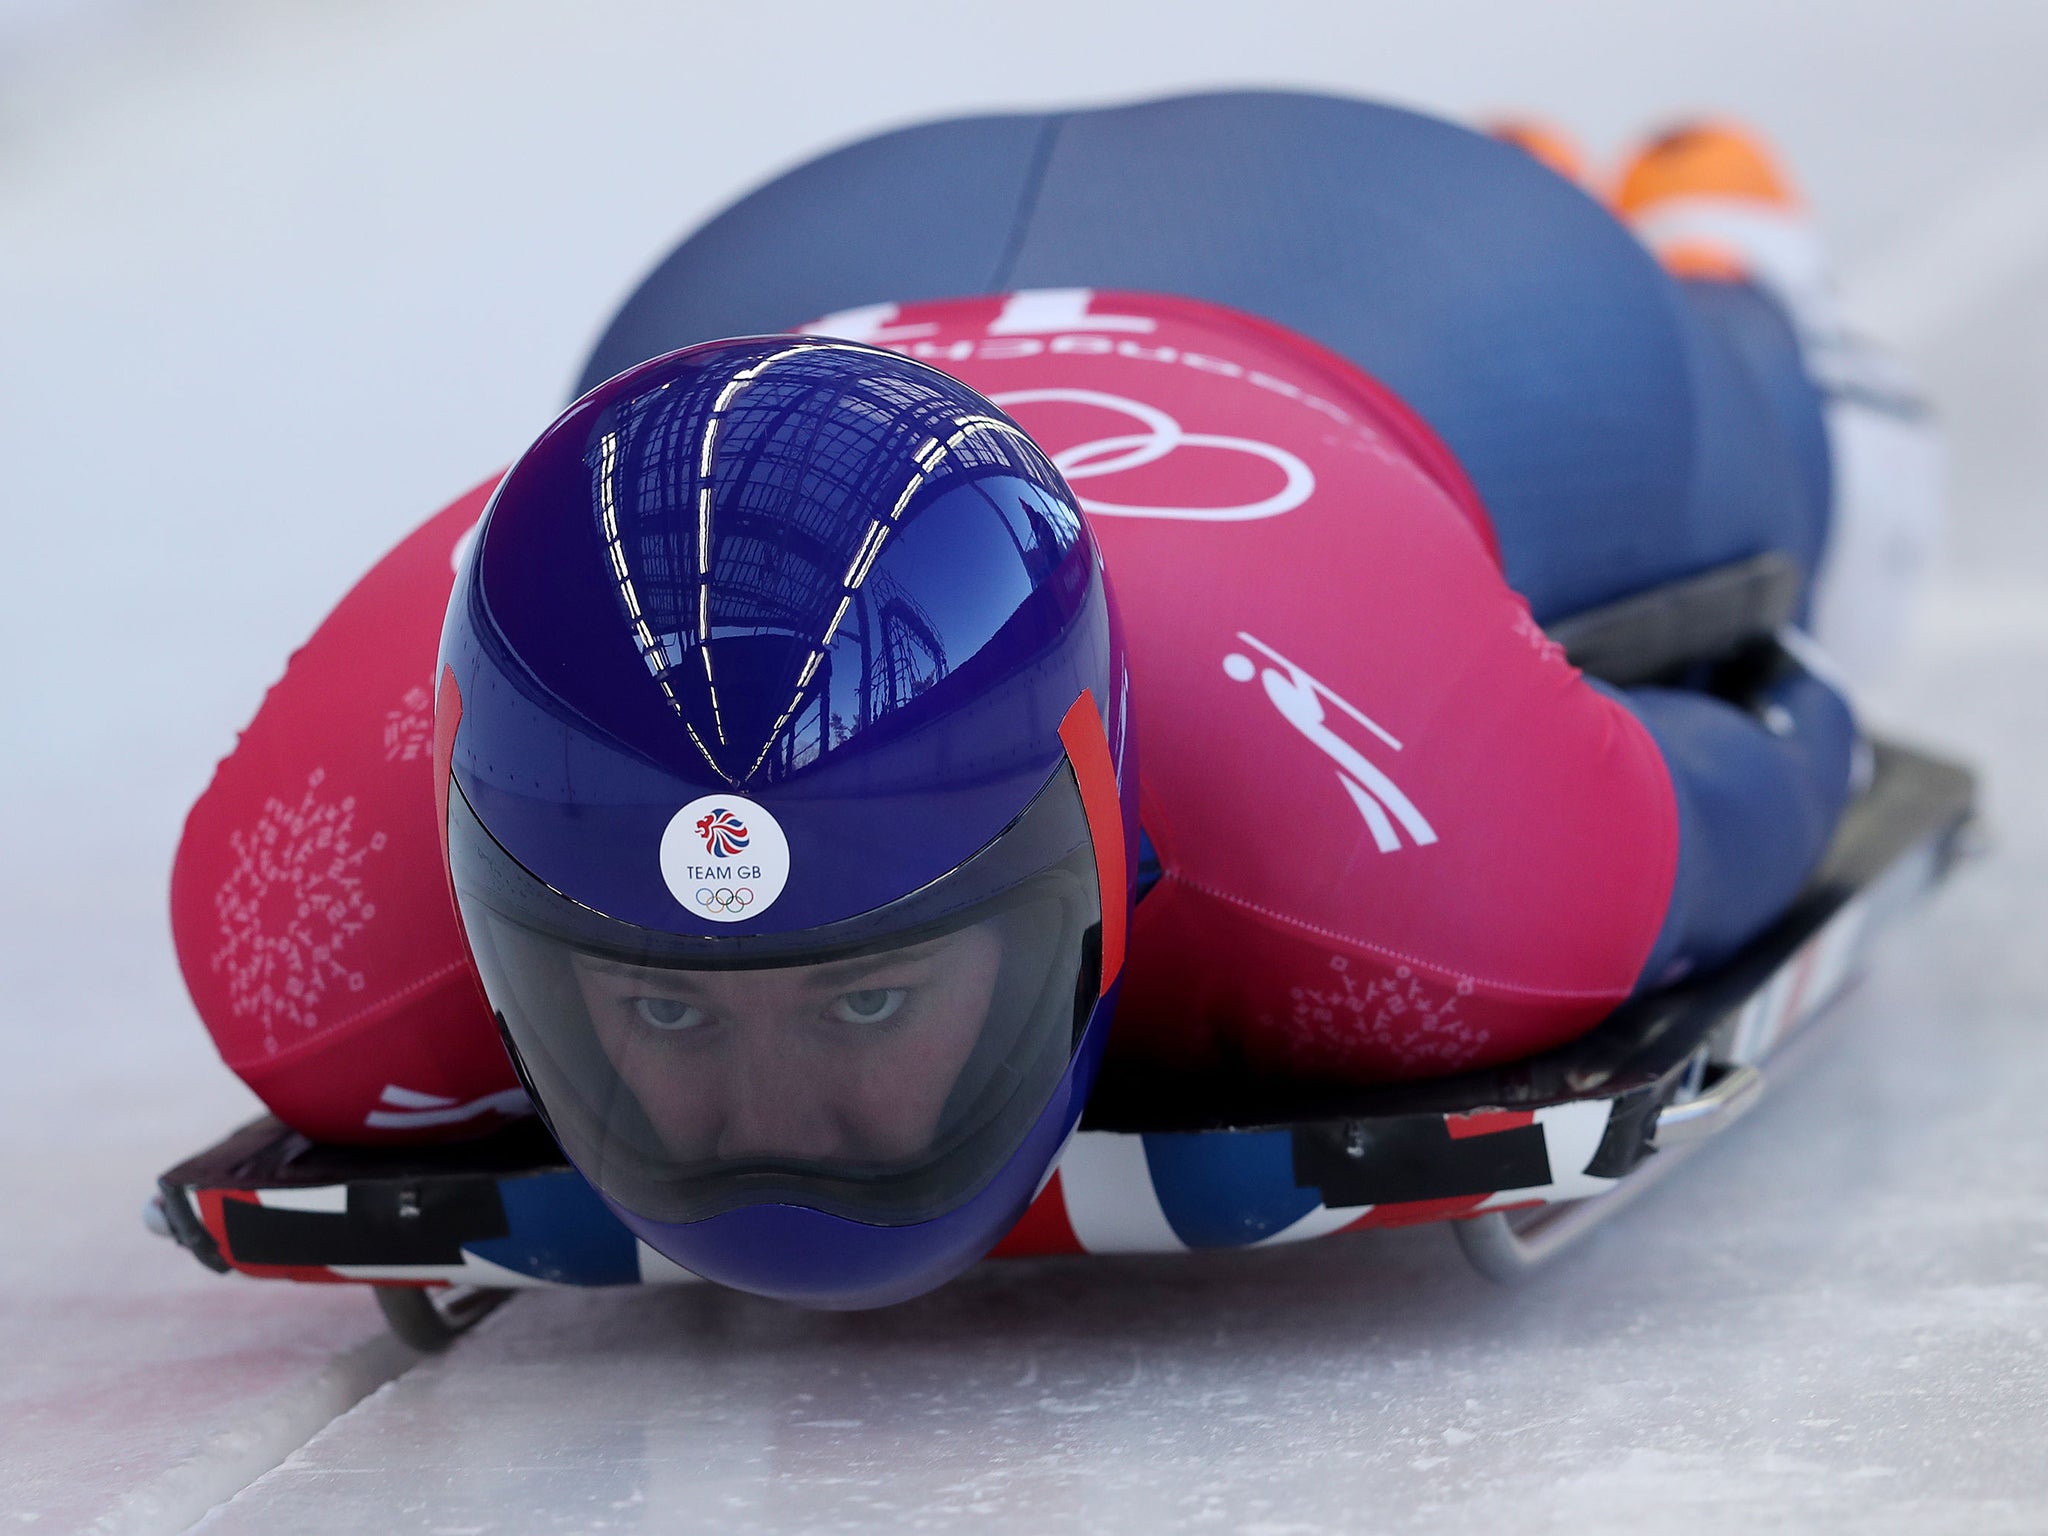 Lizzy Yarnold has been one of the fastest athletes during practice runs